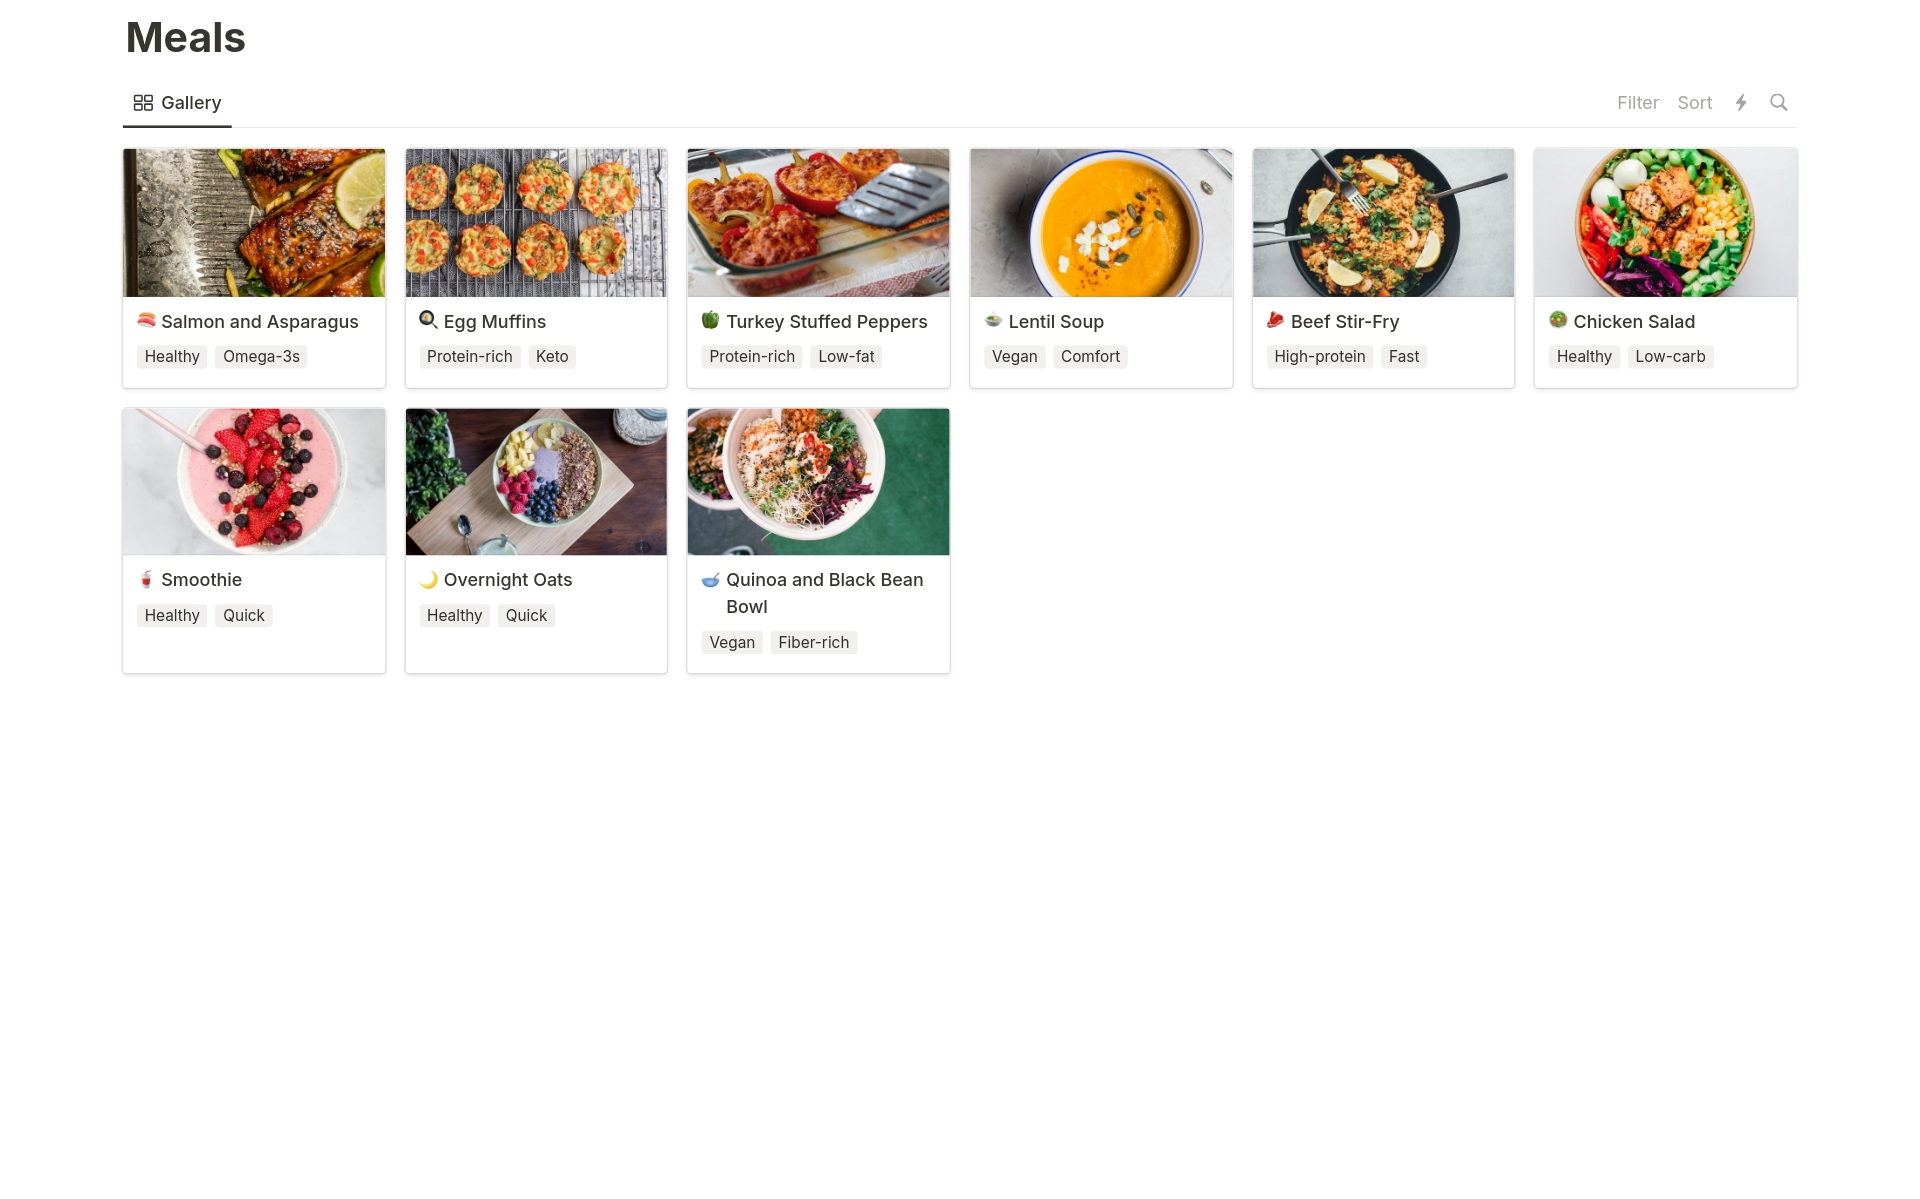 Capture recipes and ideas for meals, schedule them on a weekly basis, and generate a grocery list.